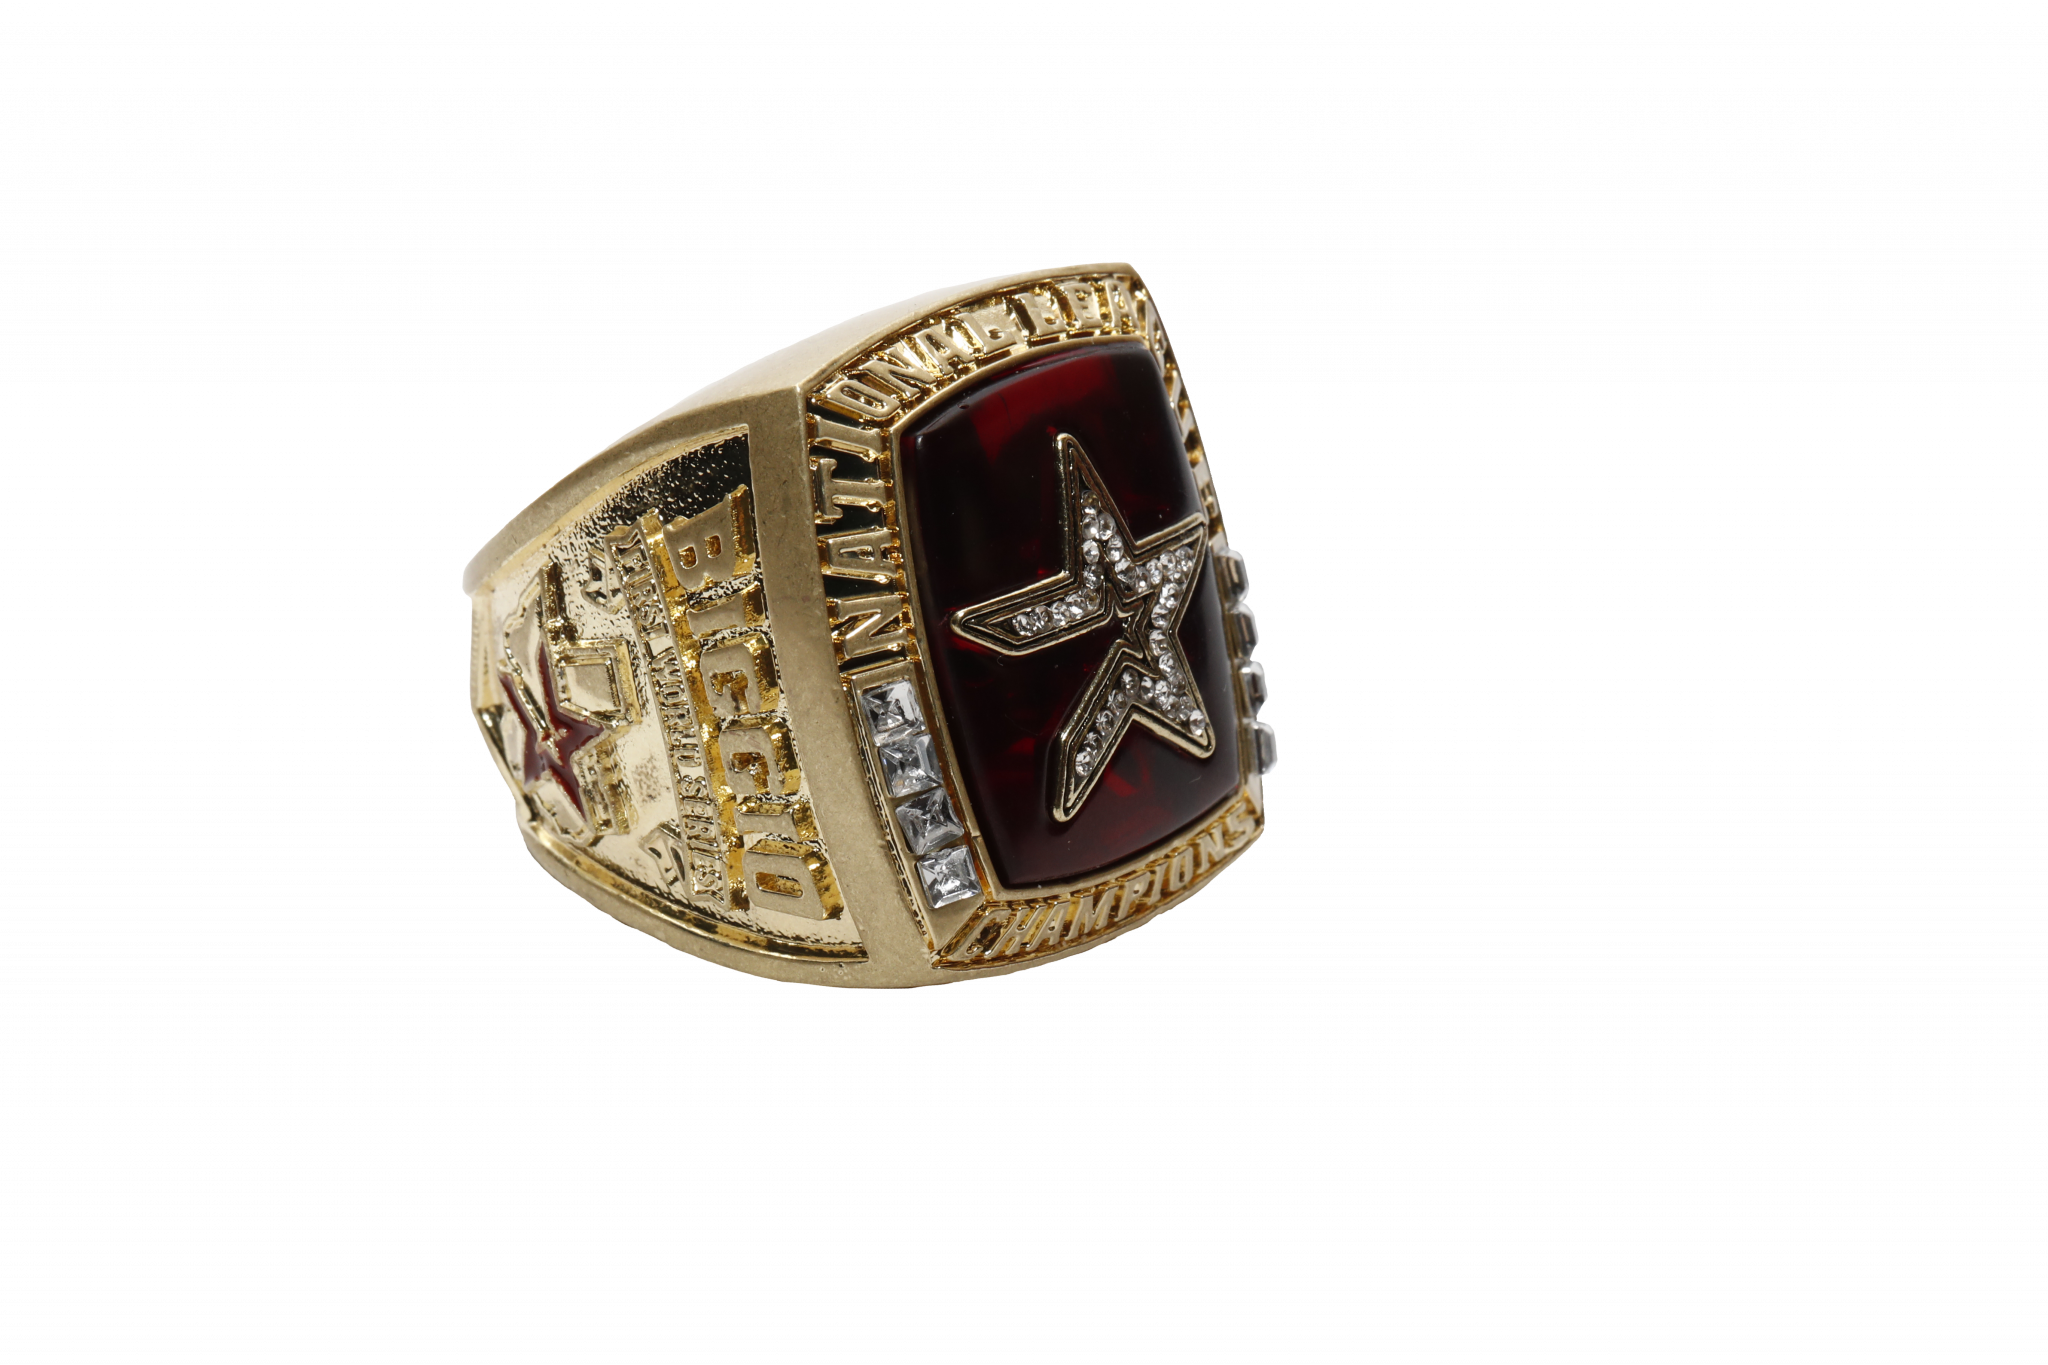 Astros to give away 2005 NL champions rings to fans